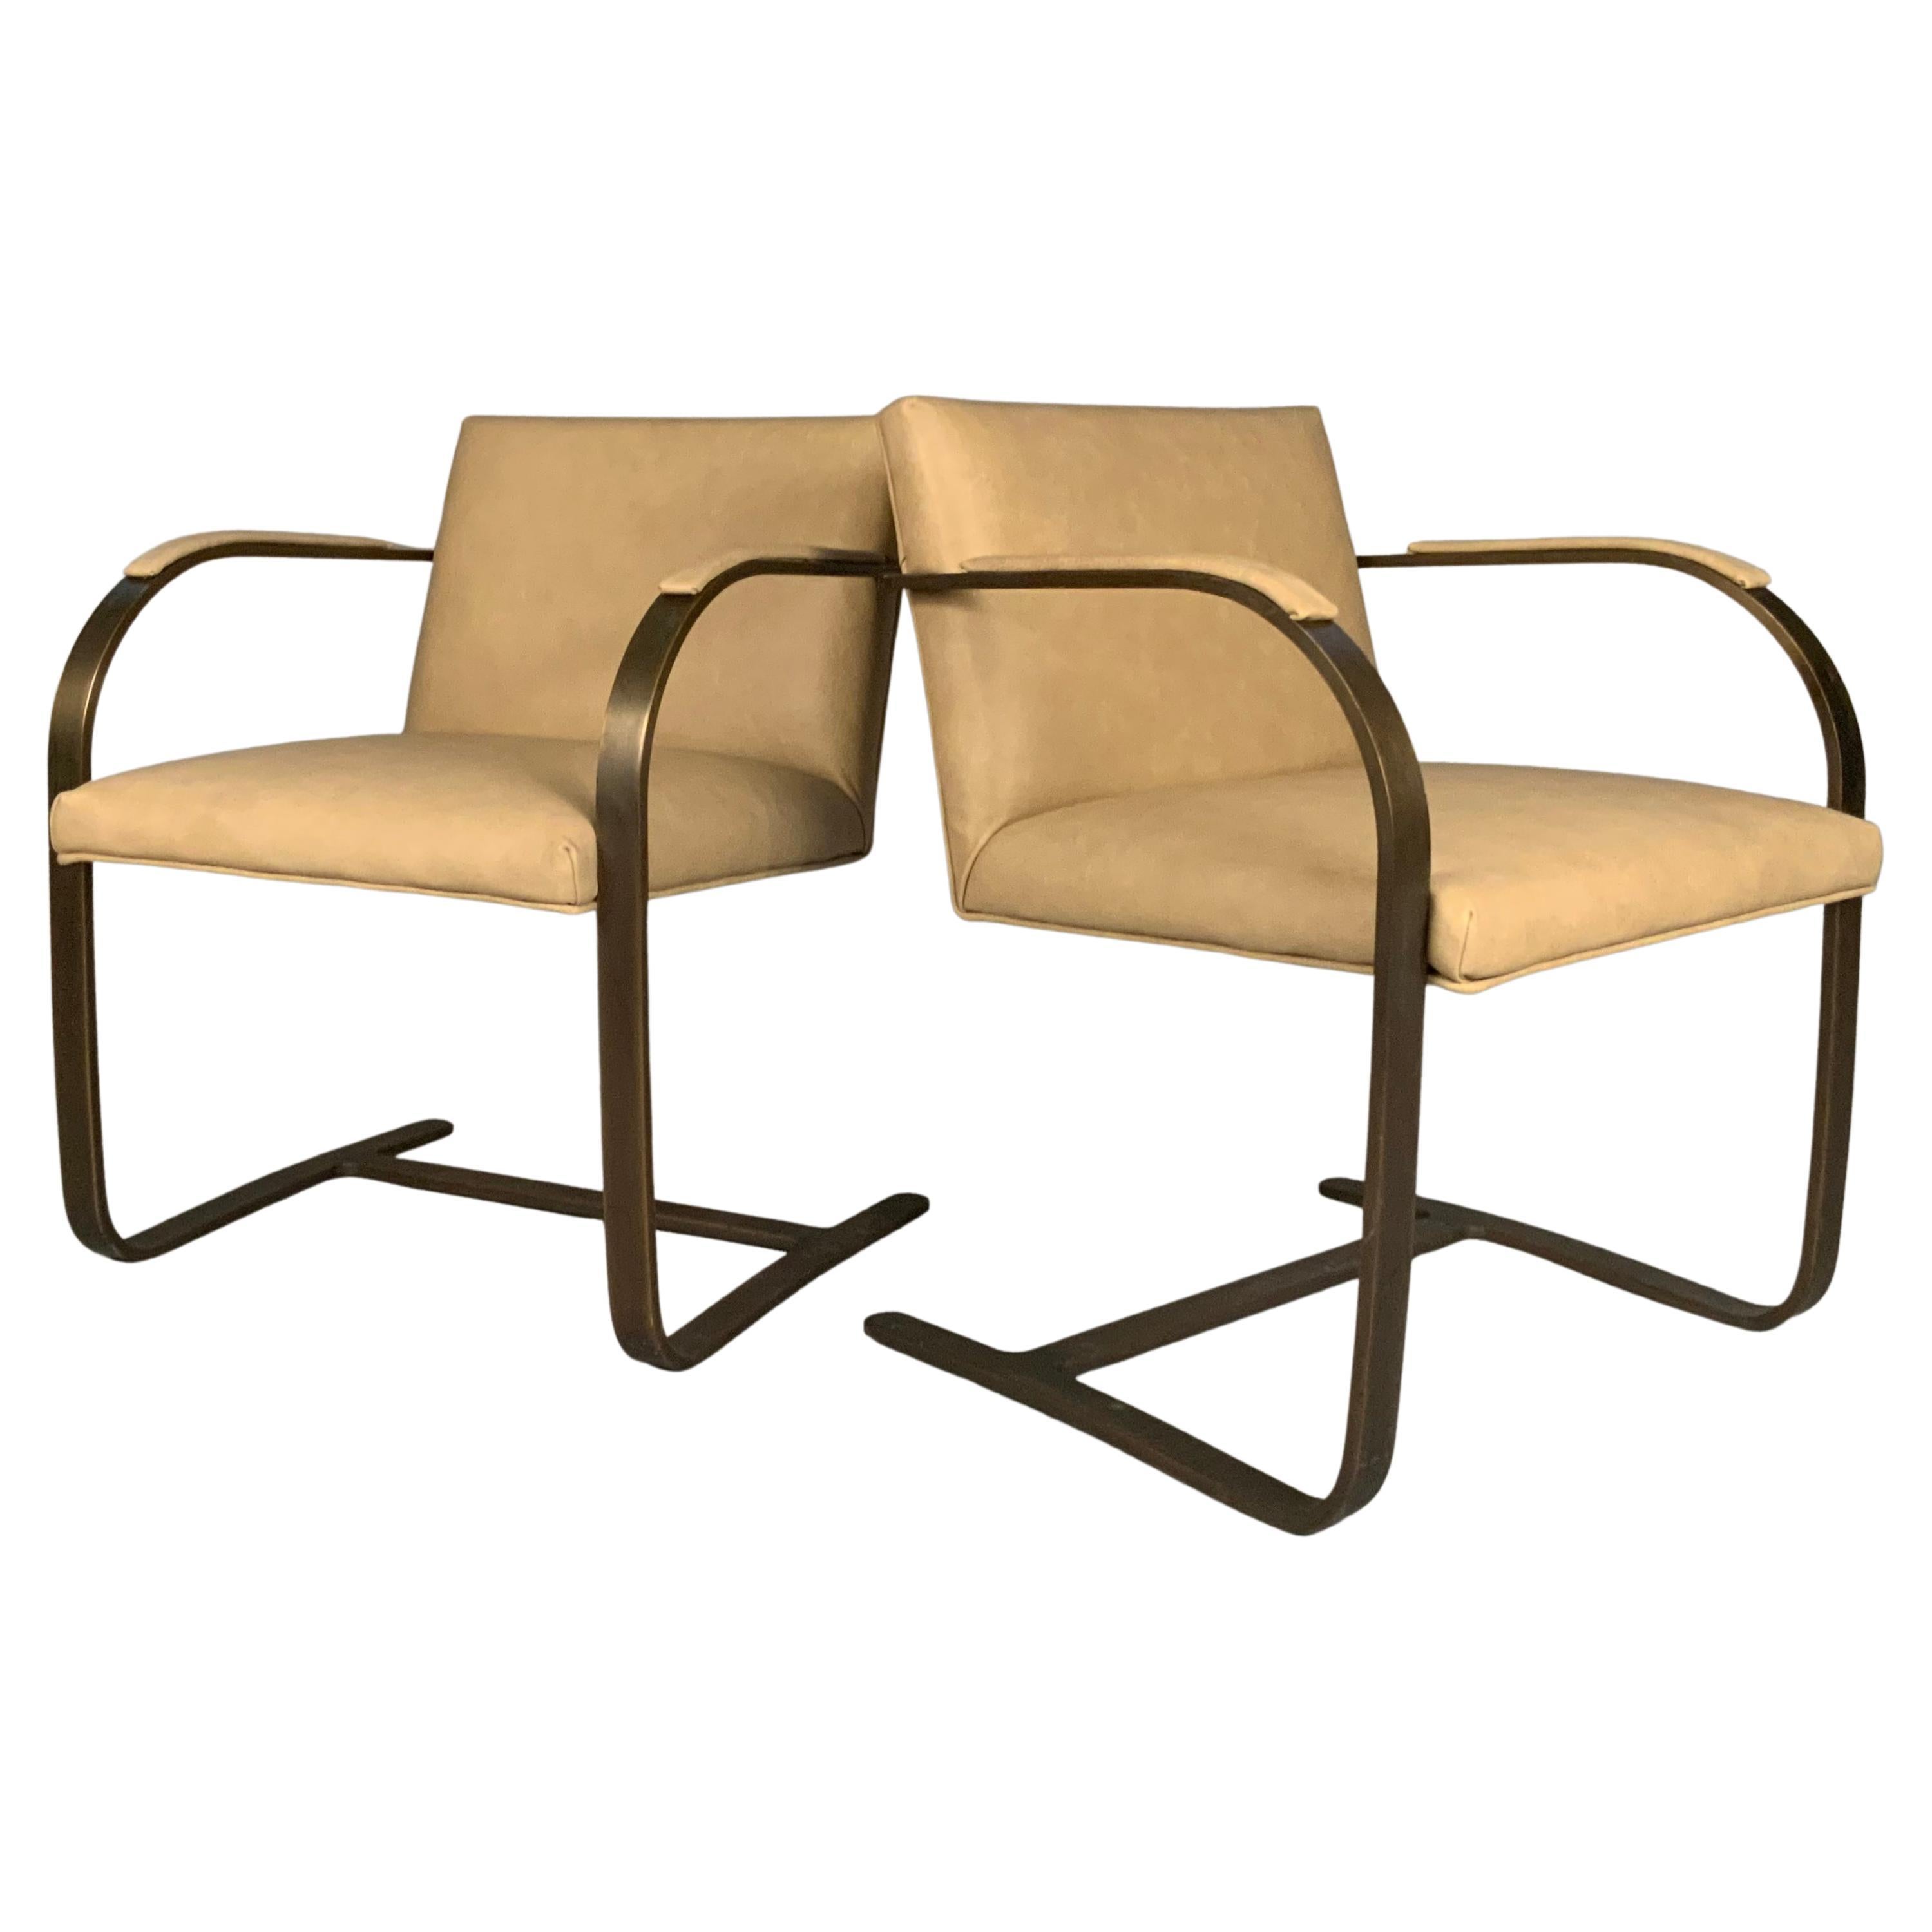 Pair of Leather Brno Flat Bar Chairs by Mies Van der Rohe for Knoll